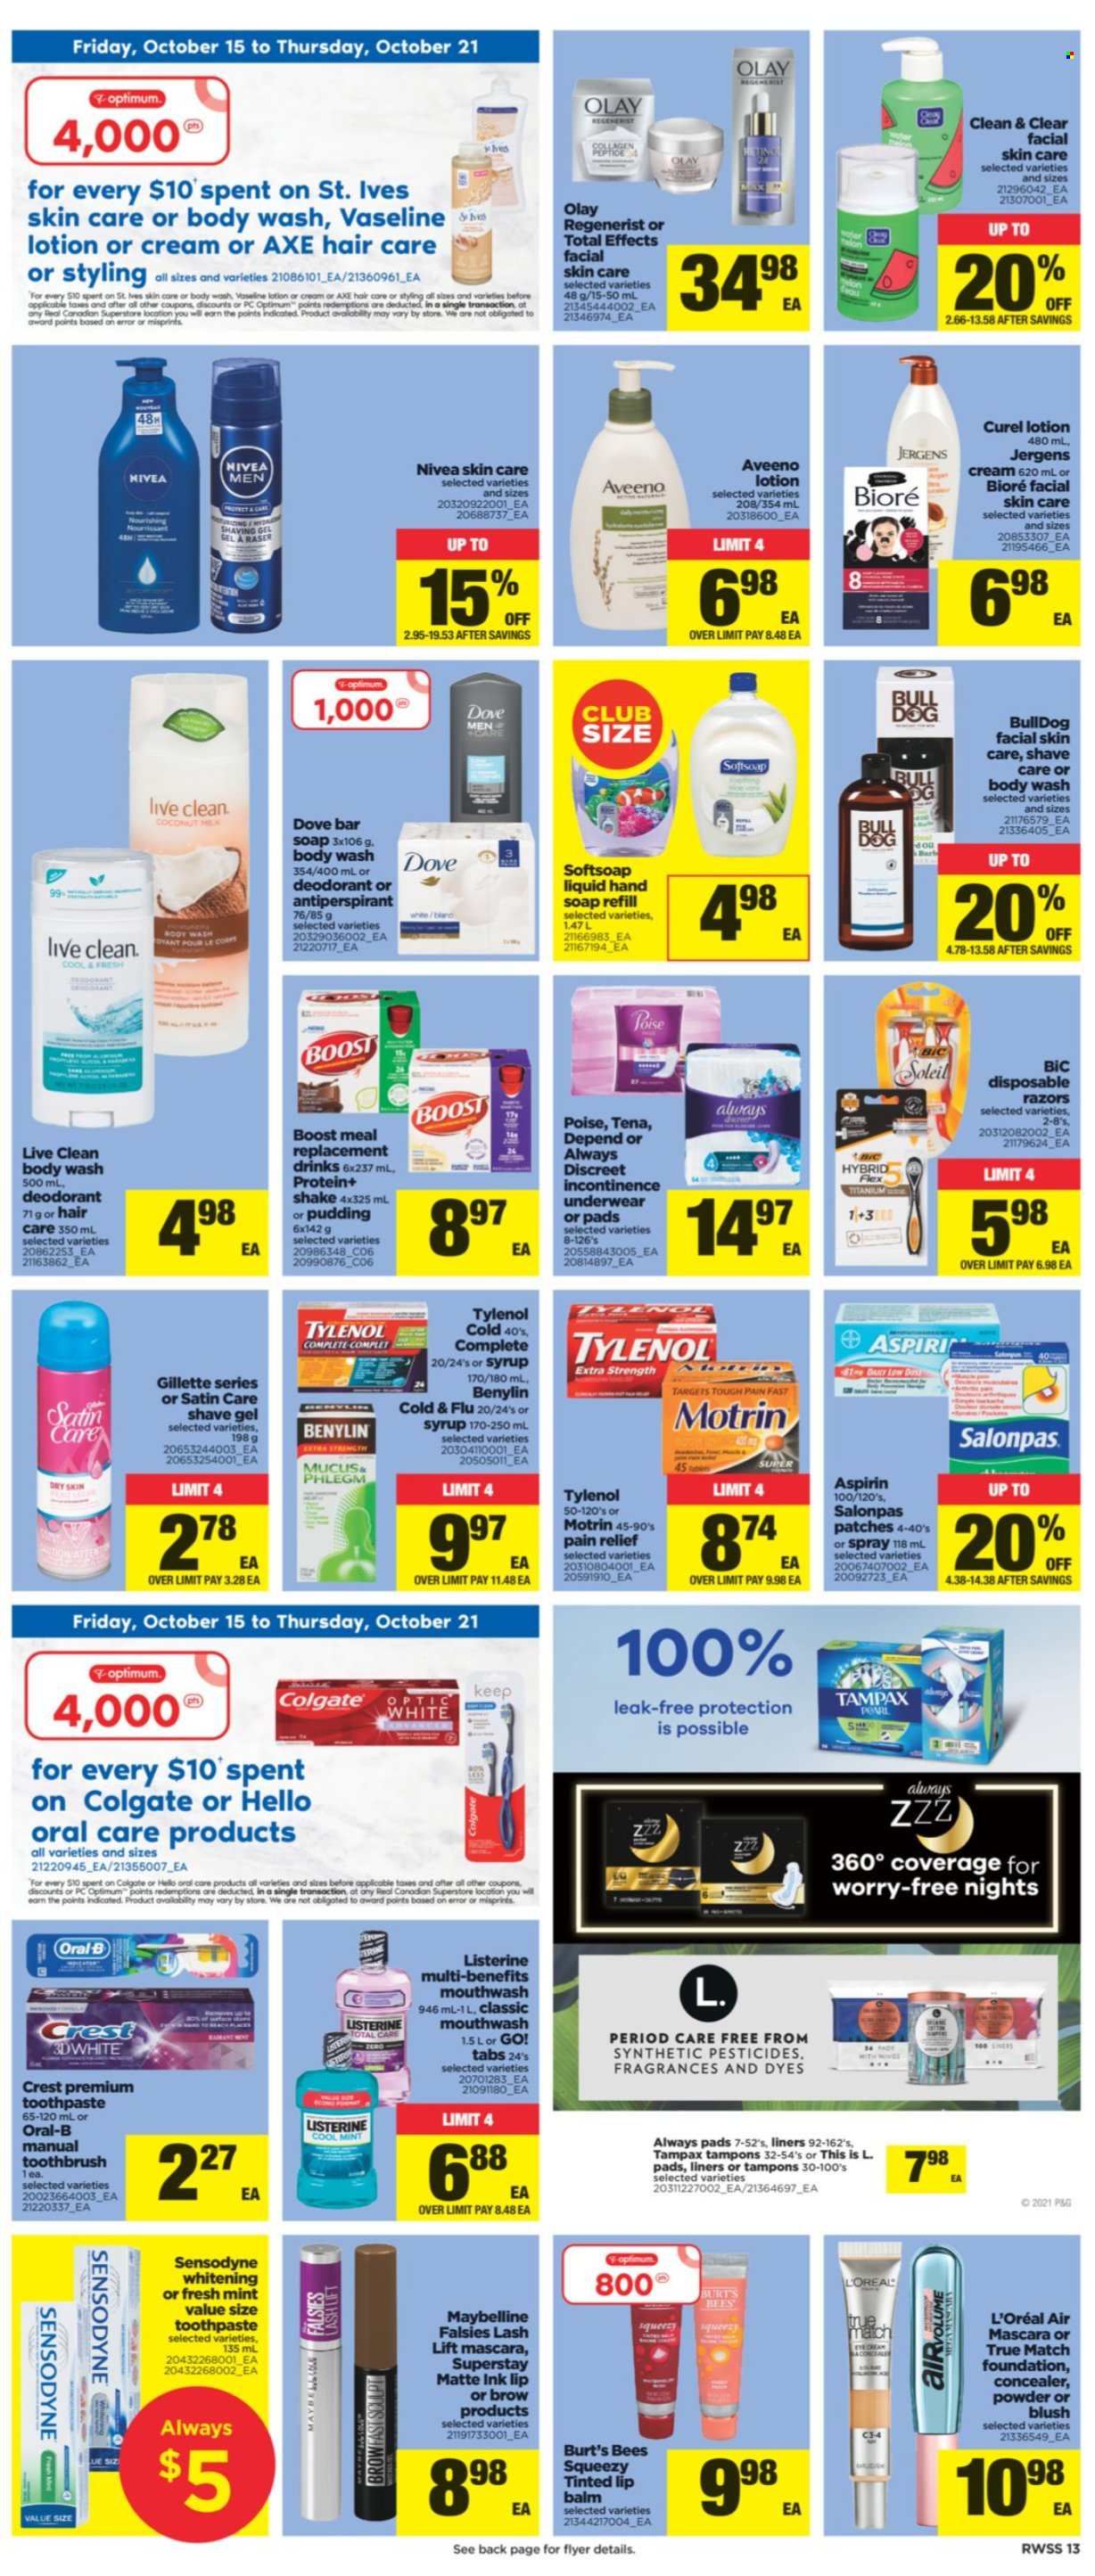 thumbnail - Real Canadian Superstore Flyer - October 15, 2021 - October 21, 2021 - Sales products - coconut, pudding, shake, Boost, Aveeno, body wash, Softsoap, hand soap, Vaseline, soap bar, soap, toothbrush, toothpaste, mouthwash, Crest, Always pads, incontinence underwear, tampons, L’Oréal, lip balm, Olay, Curél, Bioré®, Clean & Clear, body lotion, Jergens, anti-perspirant, BIC, shave gel, disposable razor, corrector, mascara, Optimum, pain relief, Cold & Flu, Tylenol, Go!, aspirin, Benylin, Motrin, Dove, Colgate, Gillette, Listerine, Maybelline, Tampax, Nivea, Oral-B, Sensodyne, deodorant. Page 13.